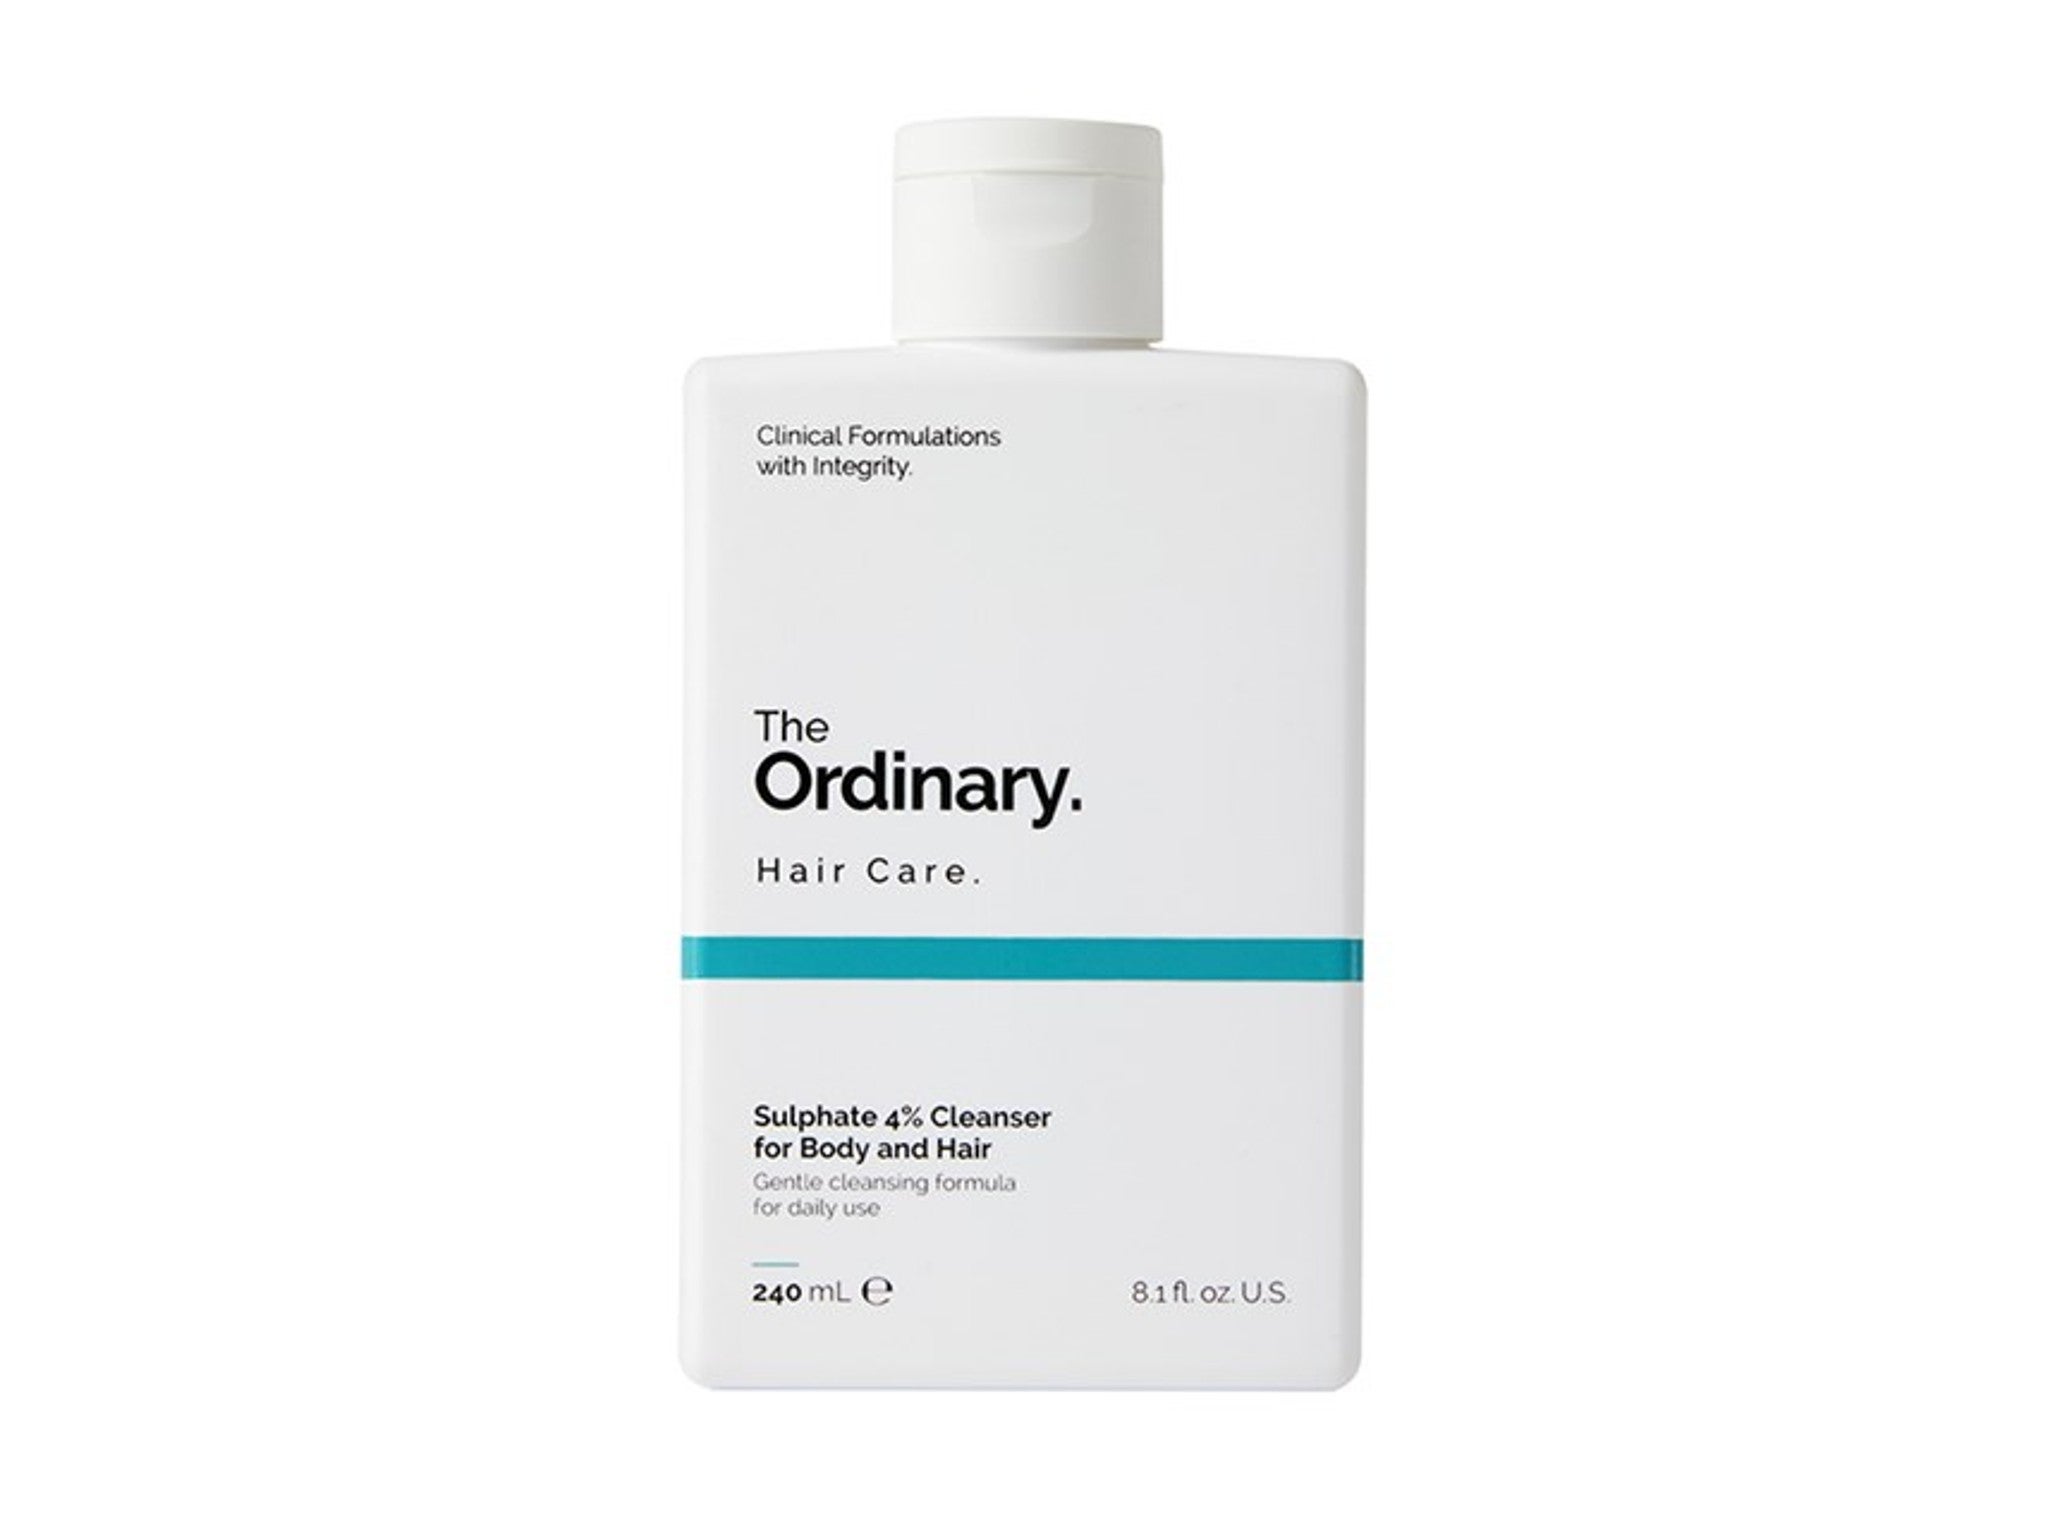 I tried The Ordinary's new haircare range to see if it lives up to the hype